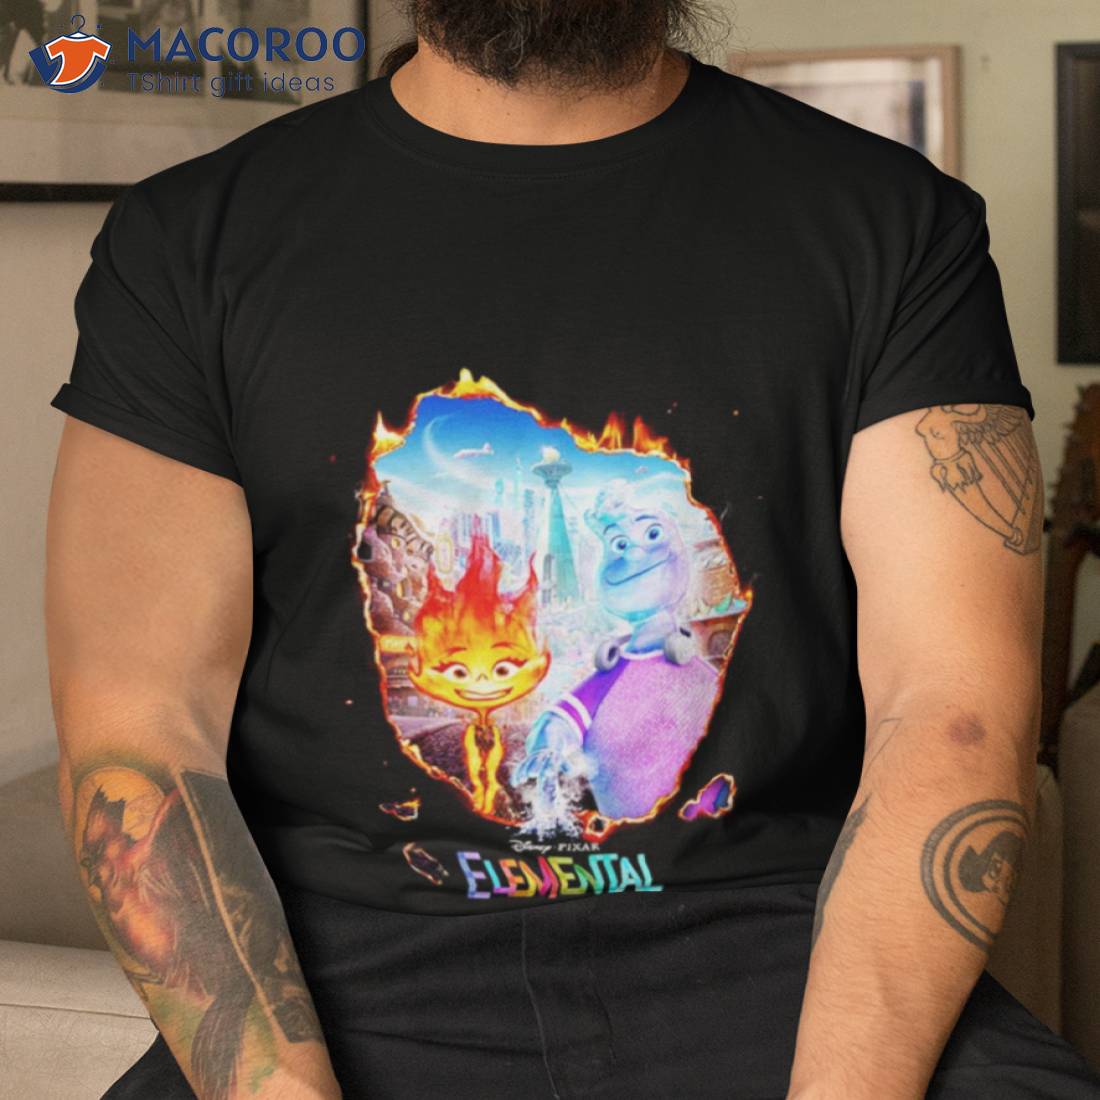 Elemental Movie By Disney And Pixar Movie T Shirt - Bring Your